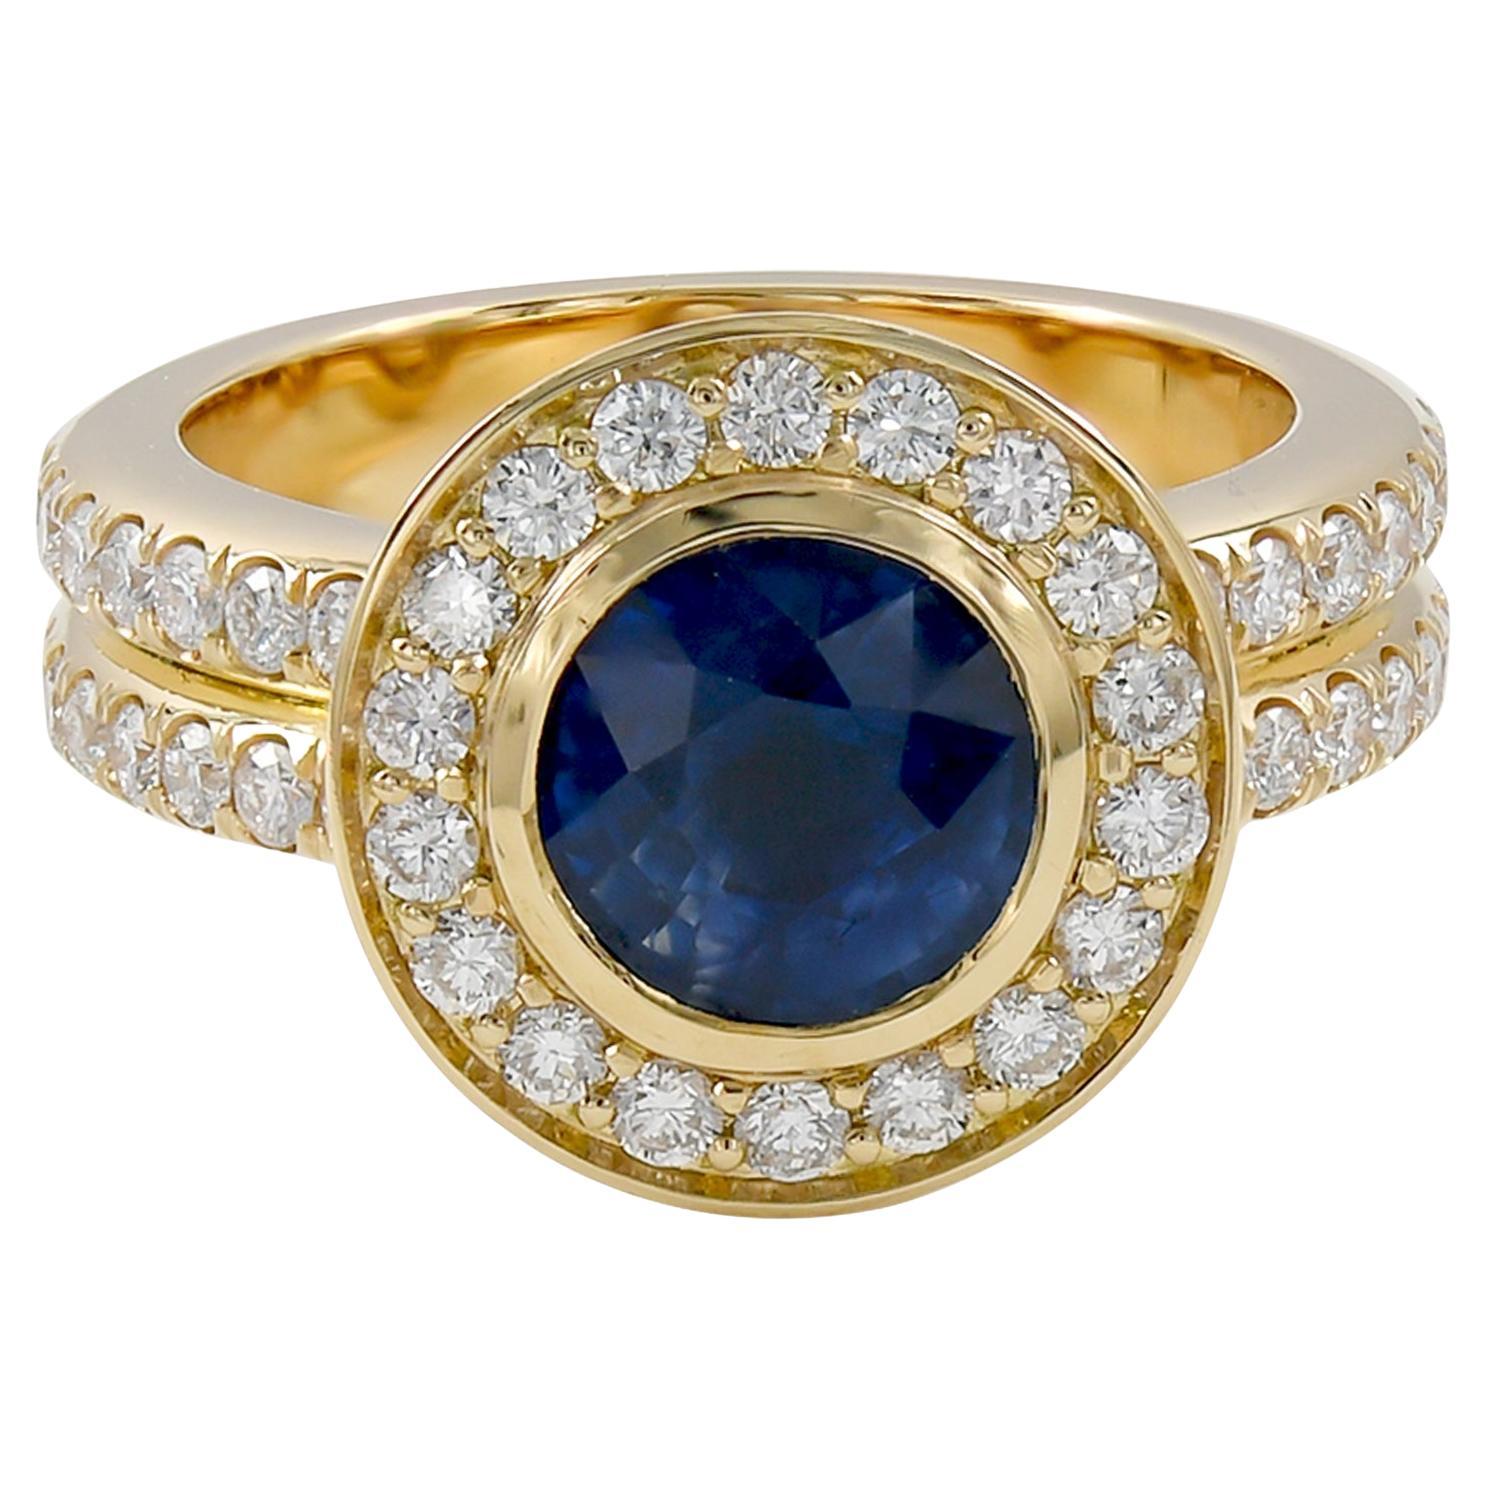 Spectra Fine Jewelry Blue Sapphire Diamond Cocktail Ring For Sale